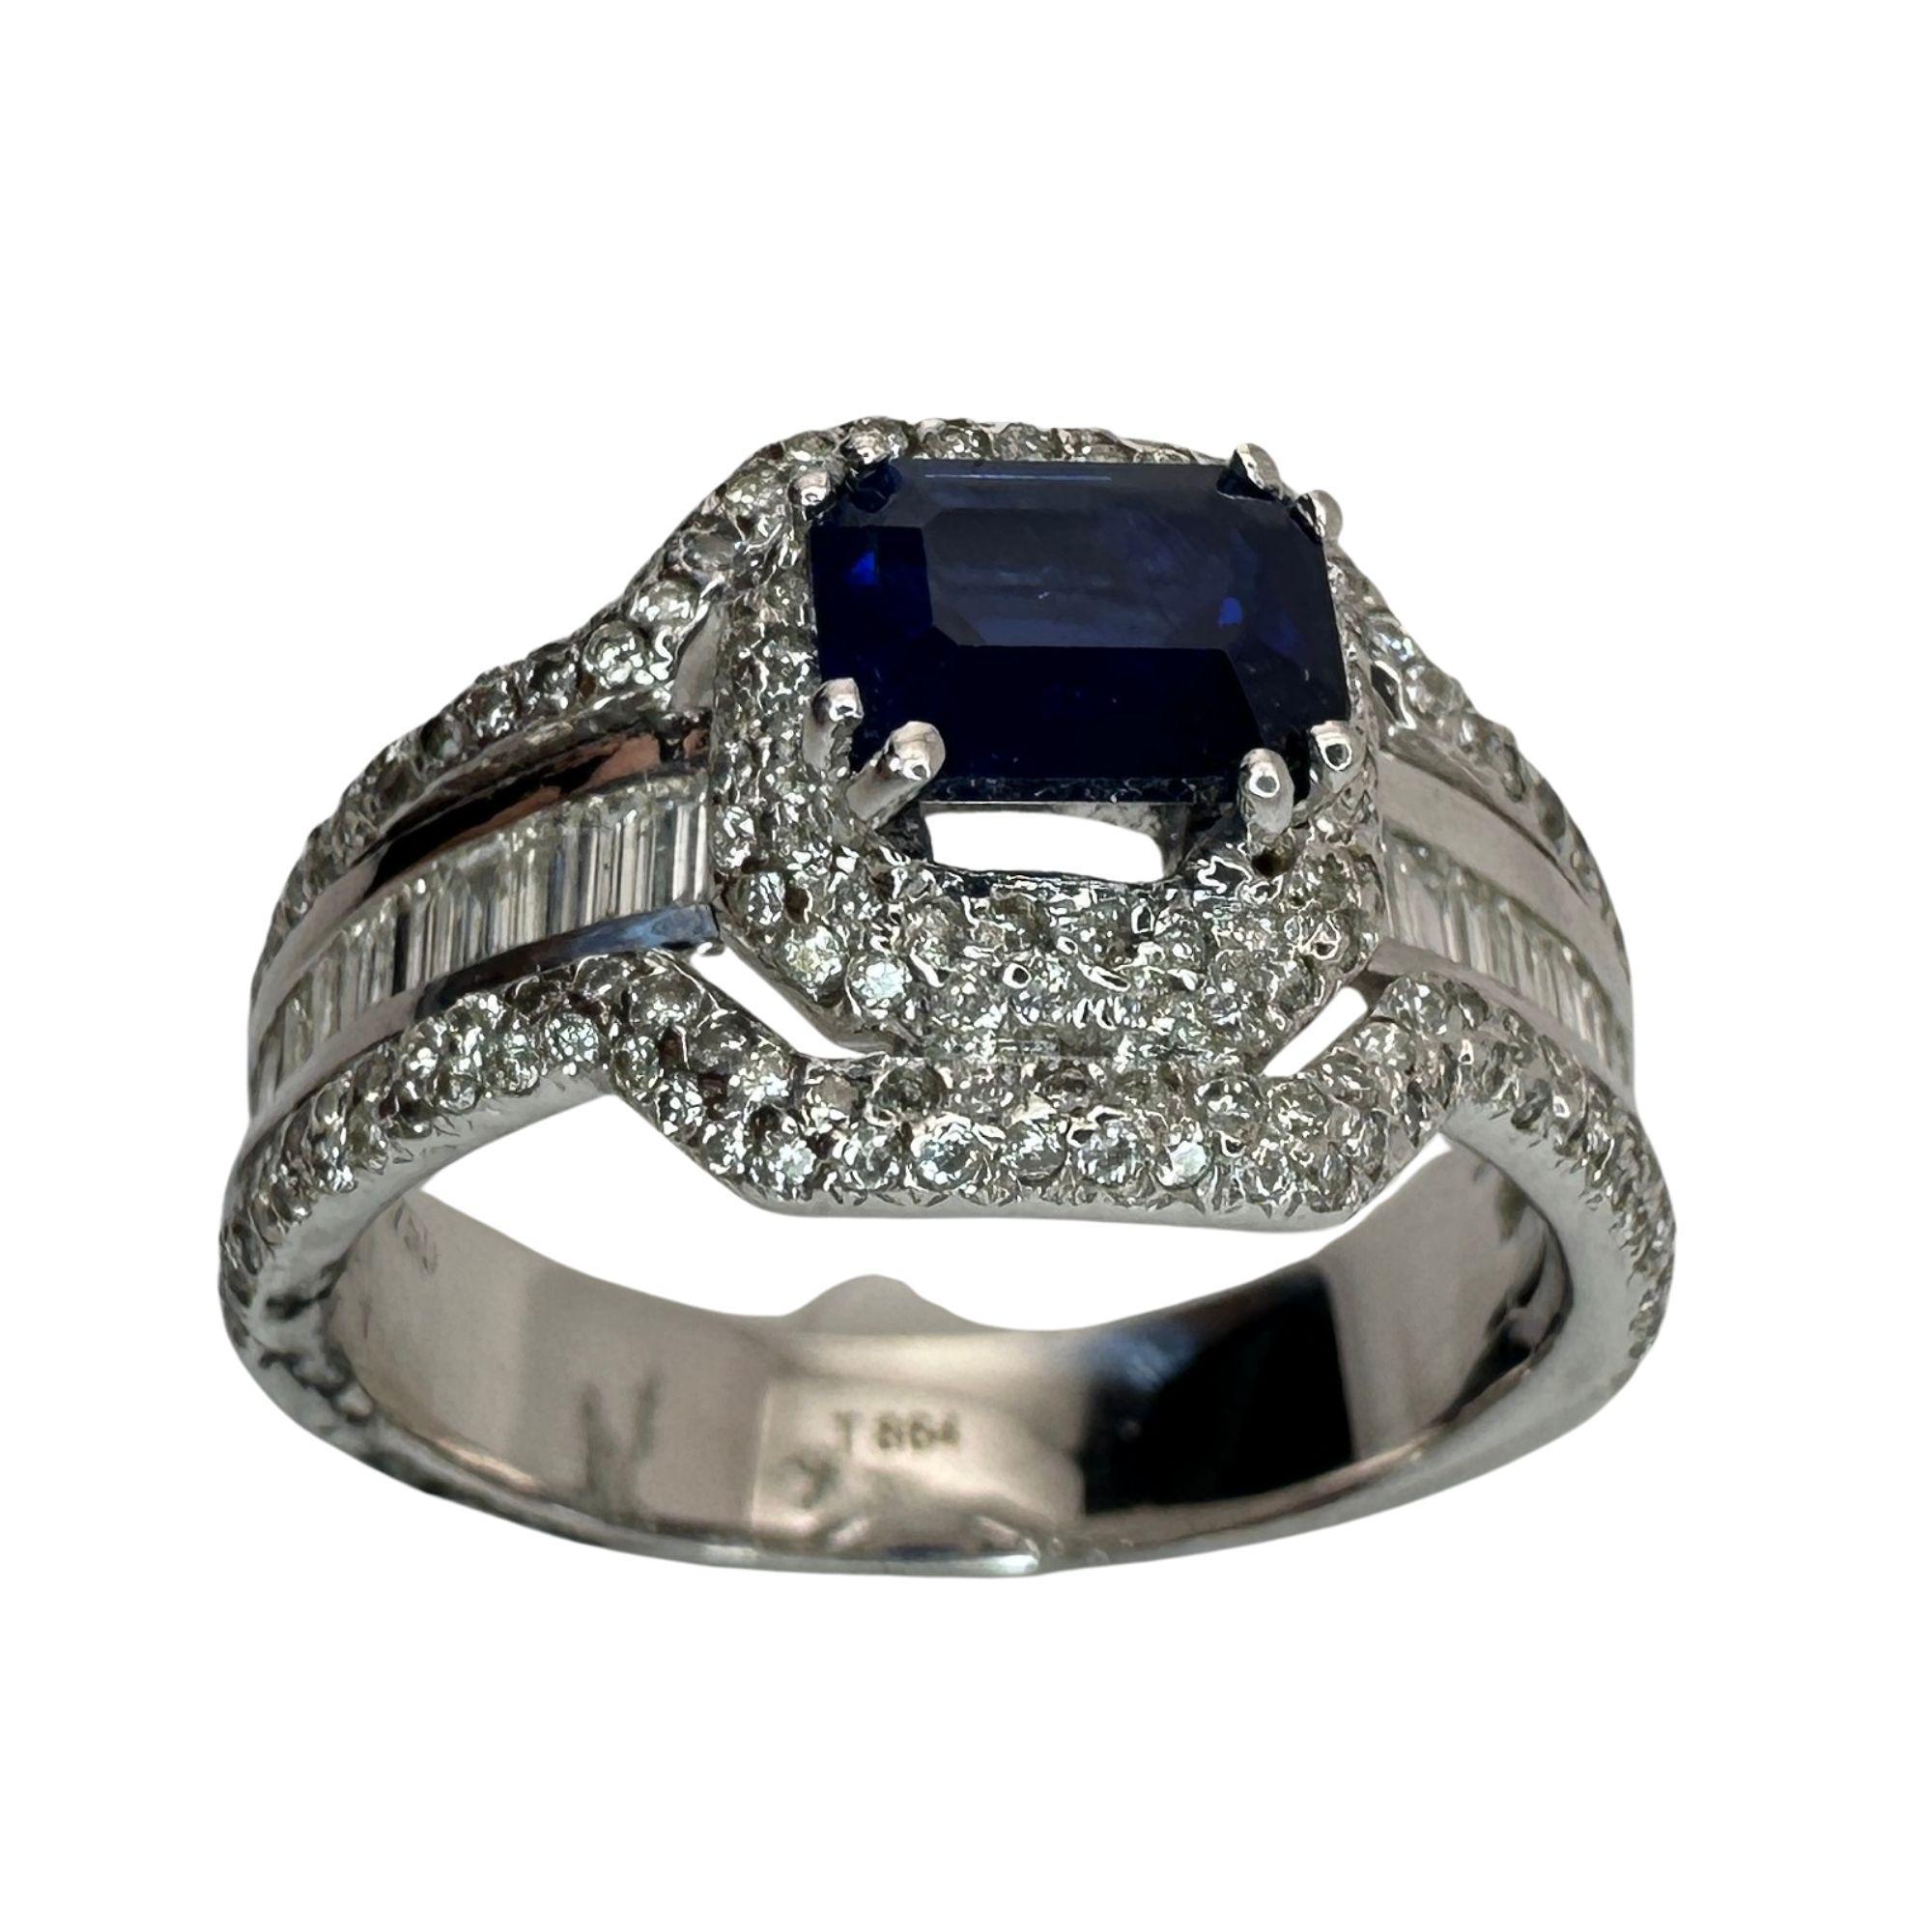 Elevate your style with our 18k Diamond and Sapphire Ring. The 1.57 carat sapphire center stone is surrounded by a sparkling halo of 0.60 carat diamond accents, accented by elegant baguette cut diamonds. With a weight of 11.19 grams and a size 8.5